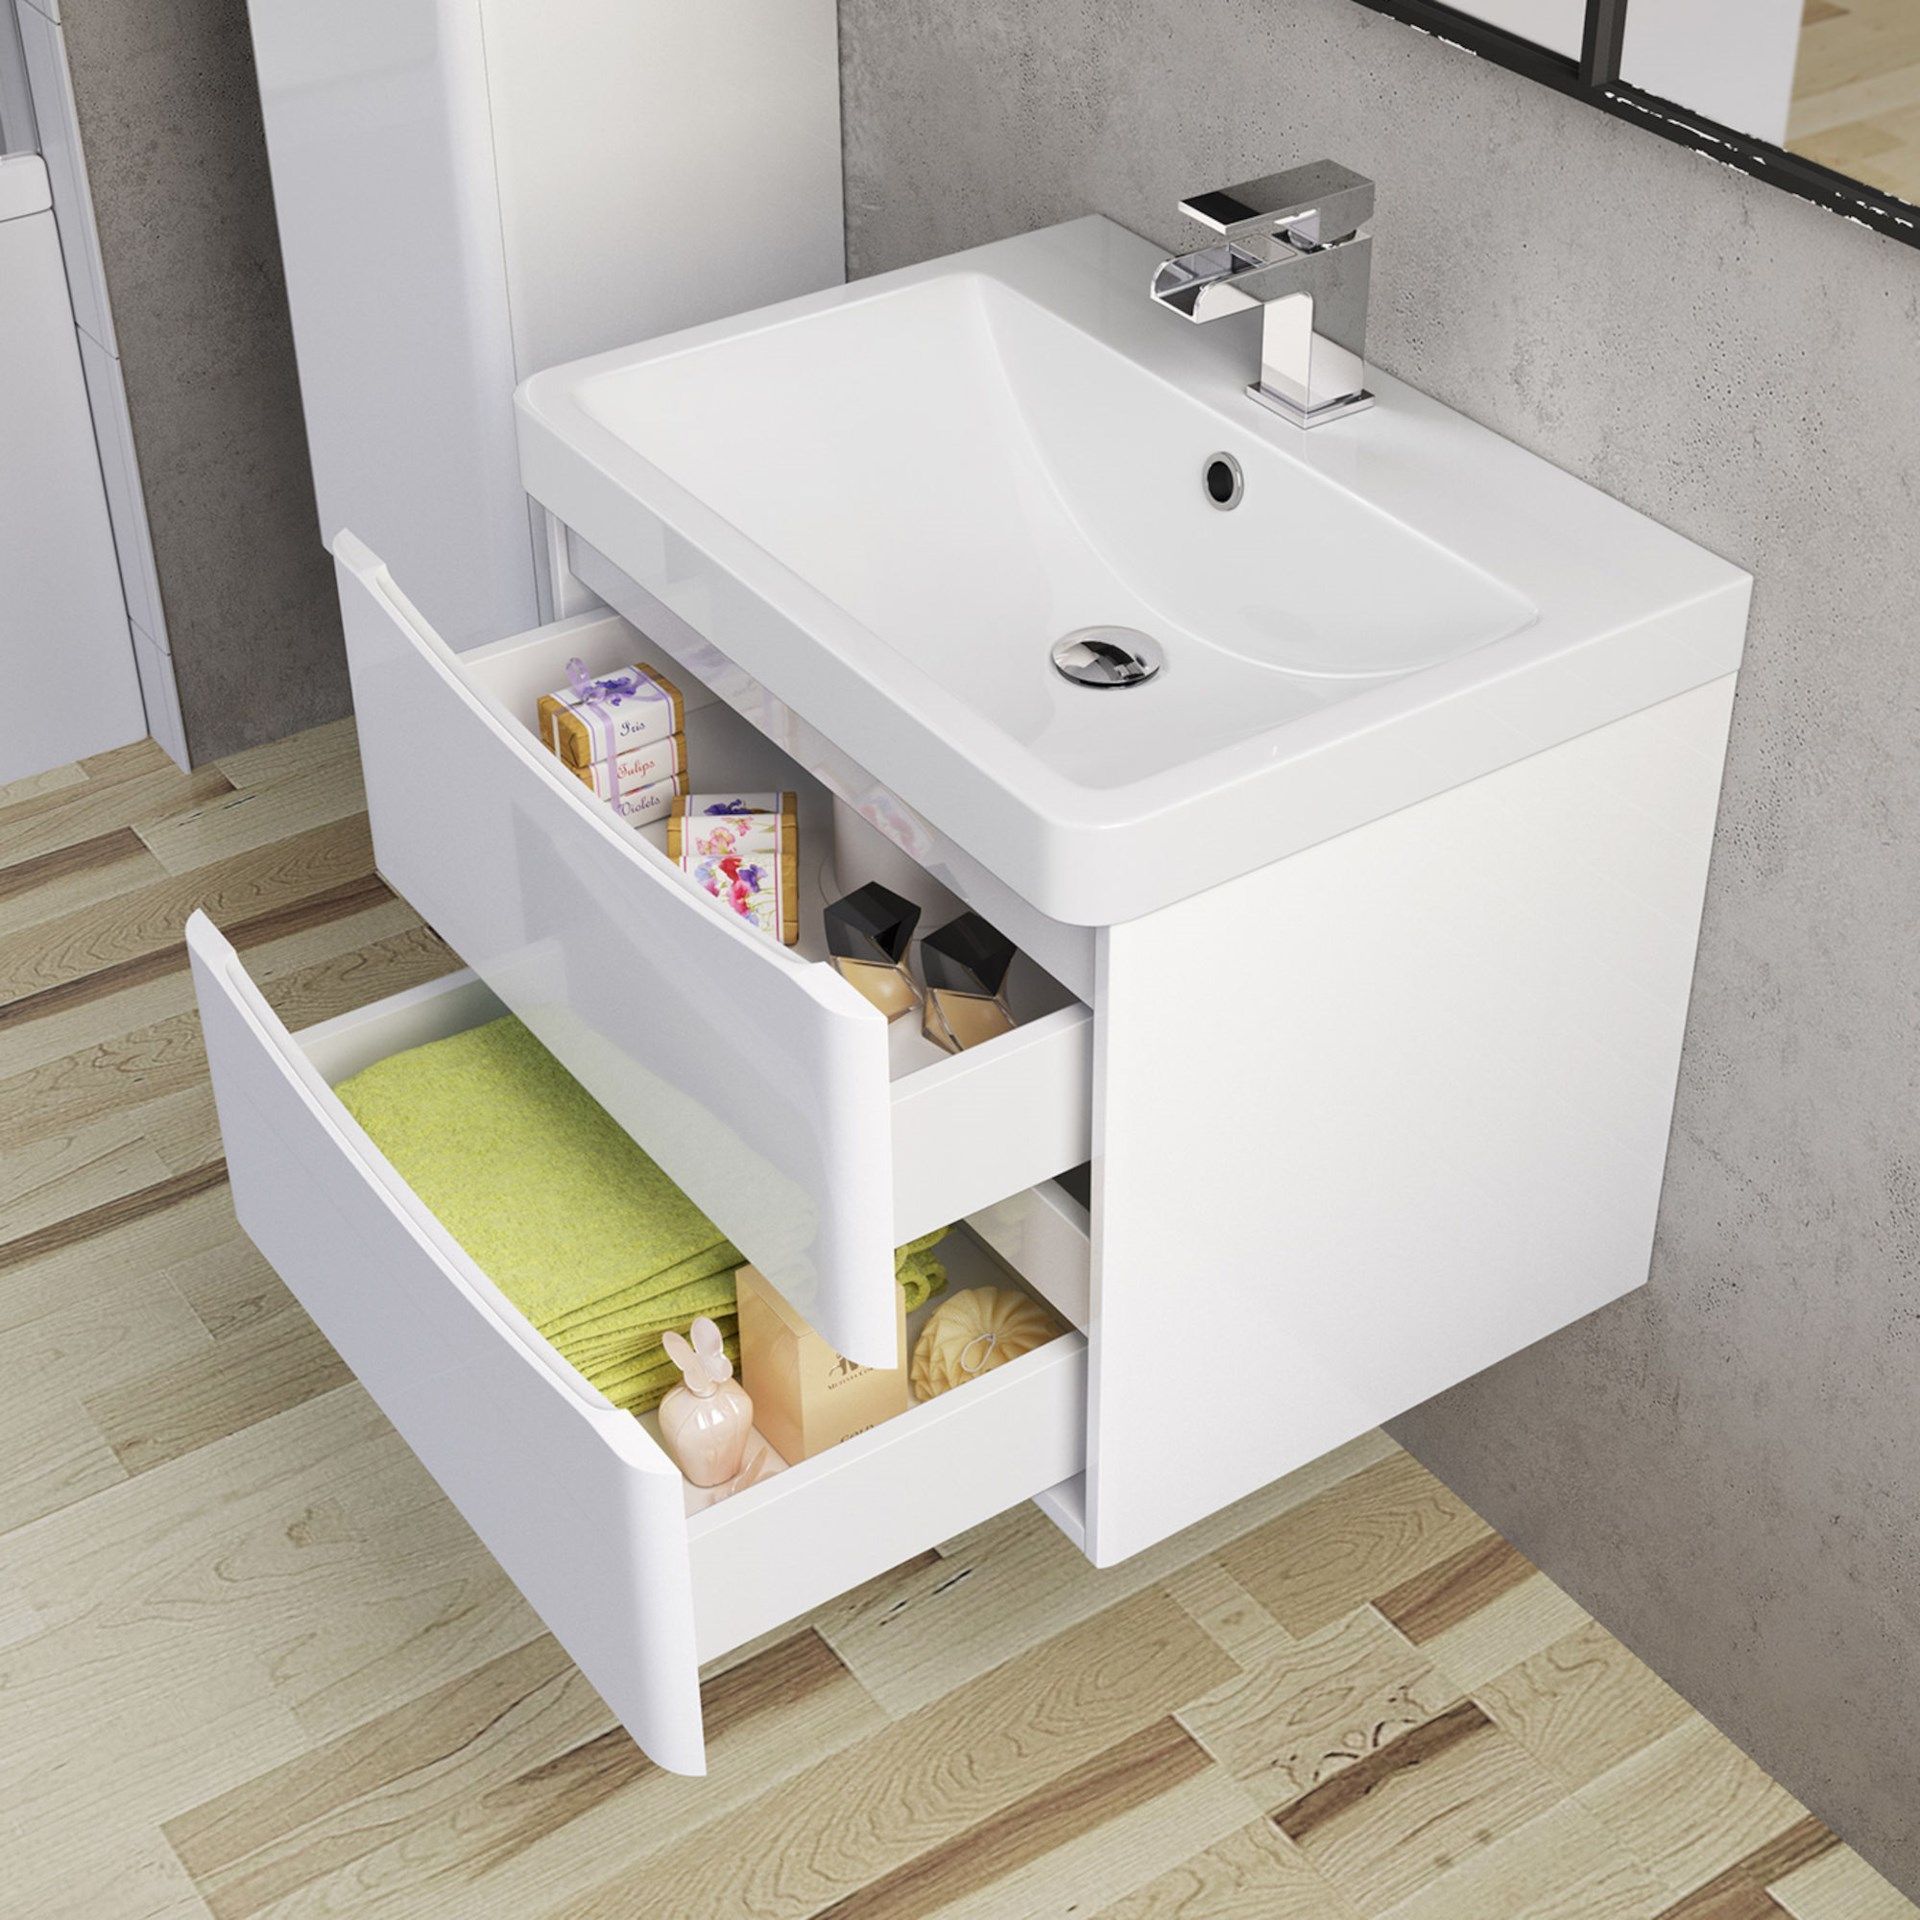 New & Boxed 600mm Austin Gloss White Built In Basin Drawer Unit - Wall Hung.Mf2417 Rrp £749.99... - Image 2 of 2